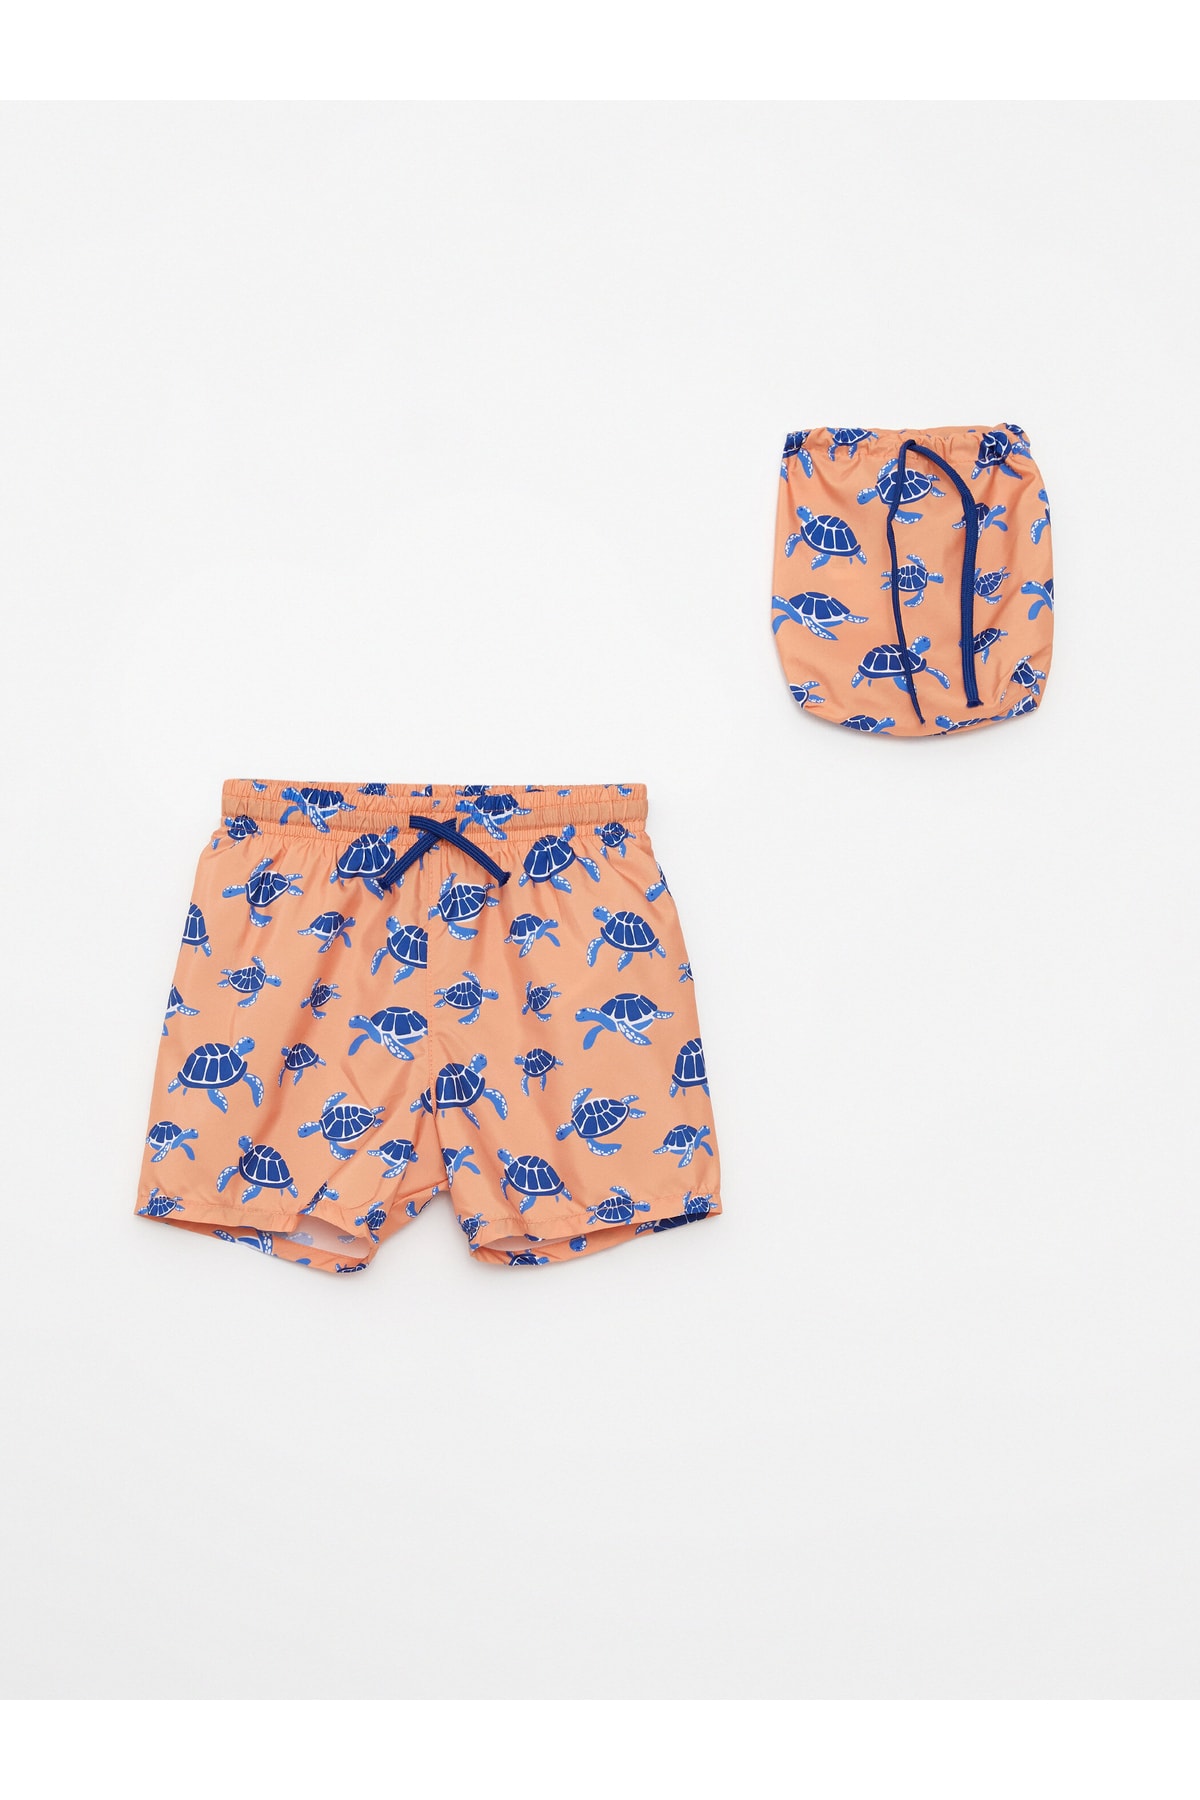 LC Waikiki Printed from Flexible Fabric, Baby Boys Beach Shorts And Shorts Pack of 2